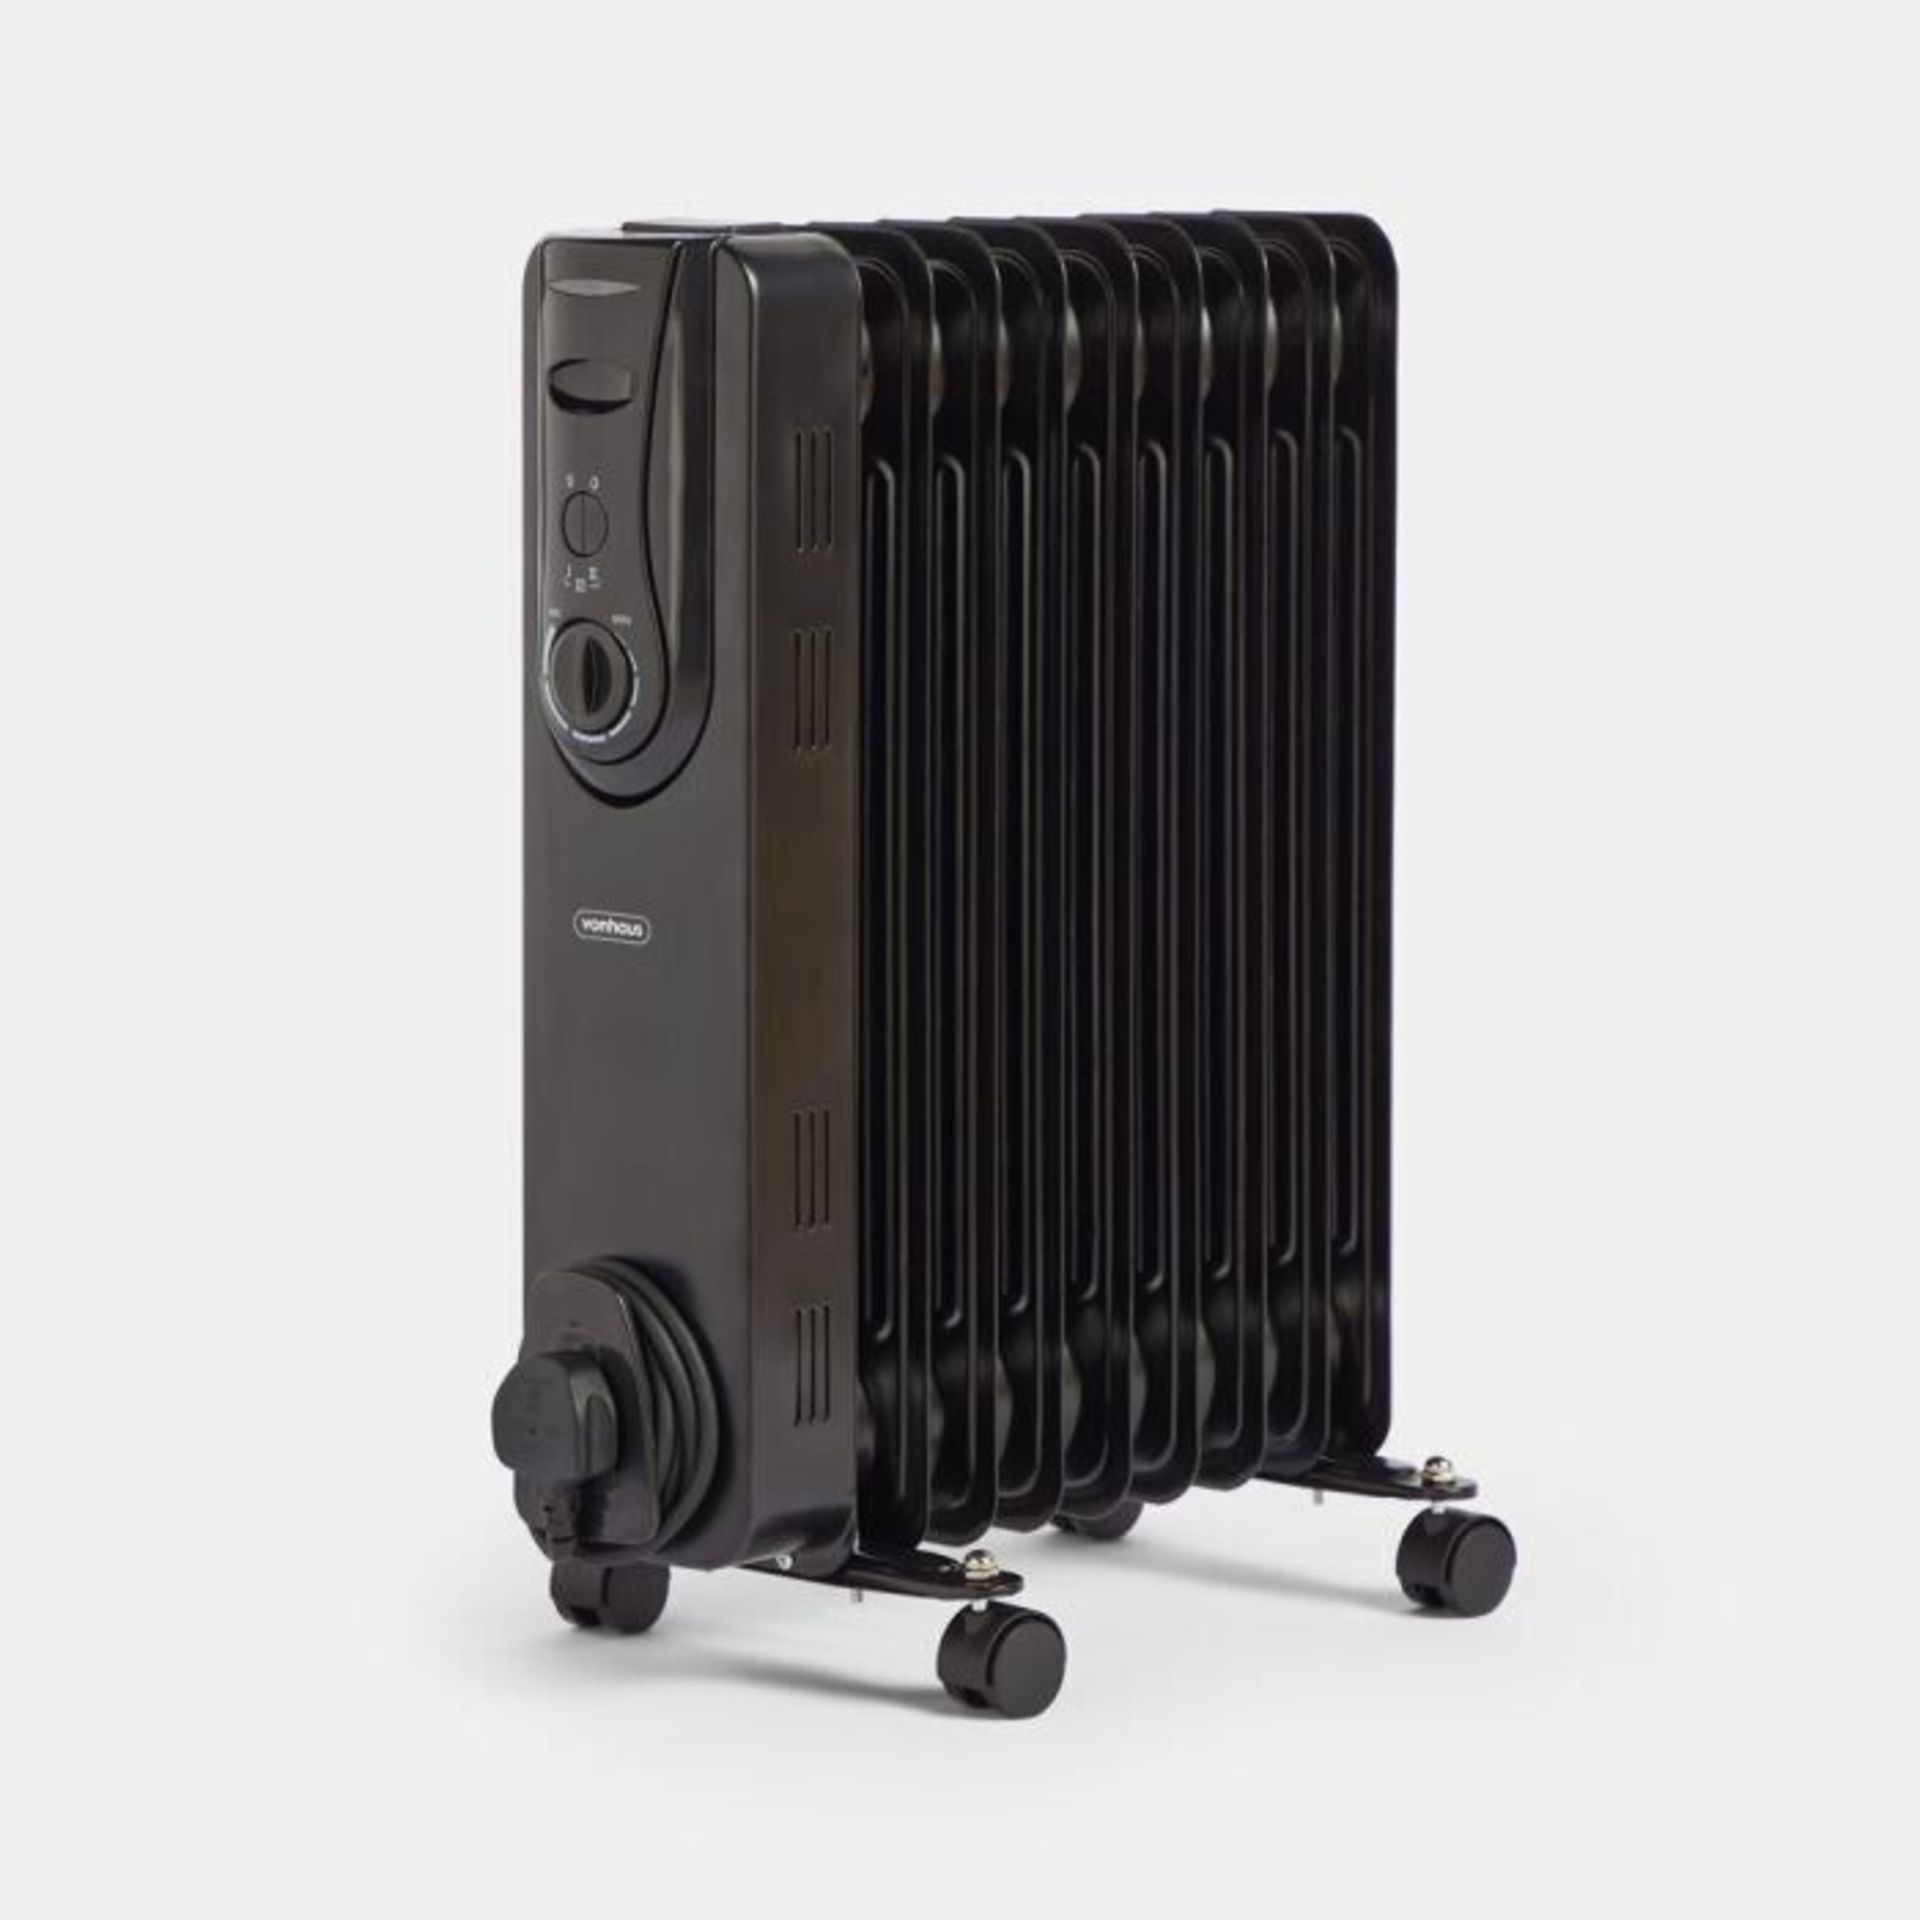 Oil Filled Radiator 11 Fin, Oil Heater Portable Electric Free Standing 2500W for Home, Office, Any